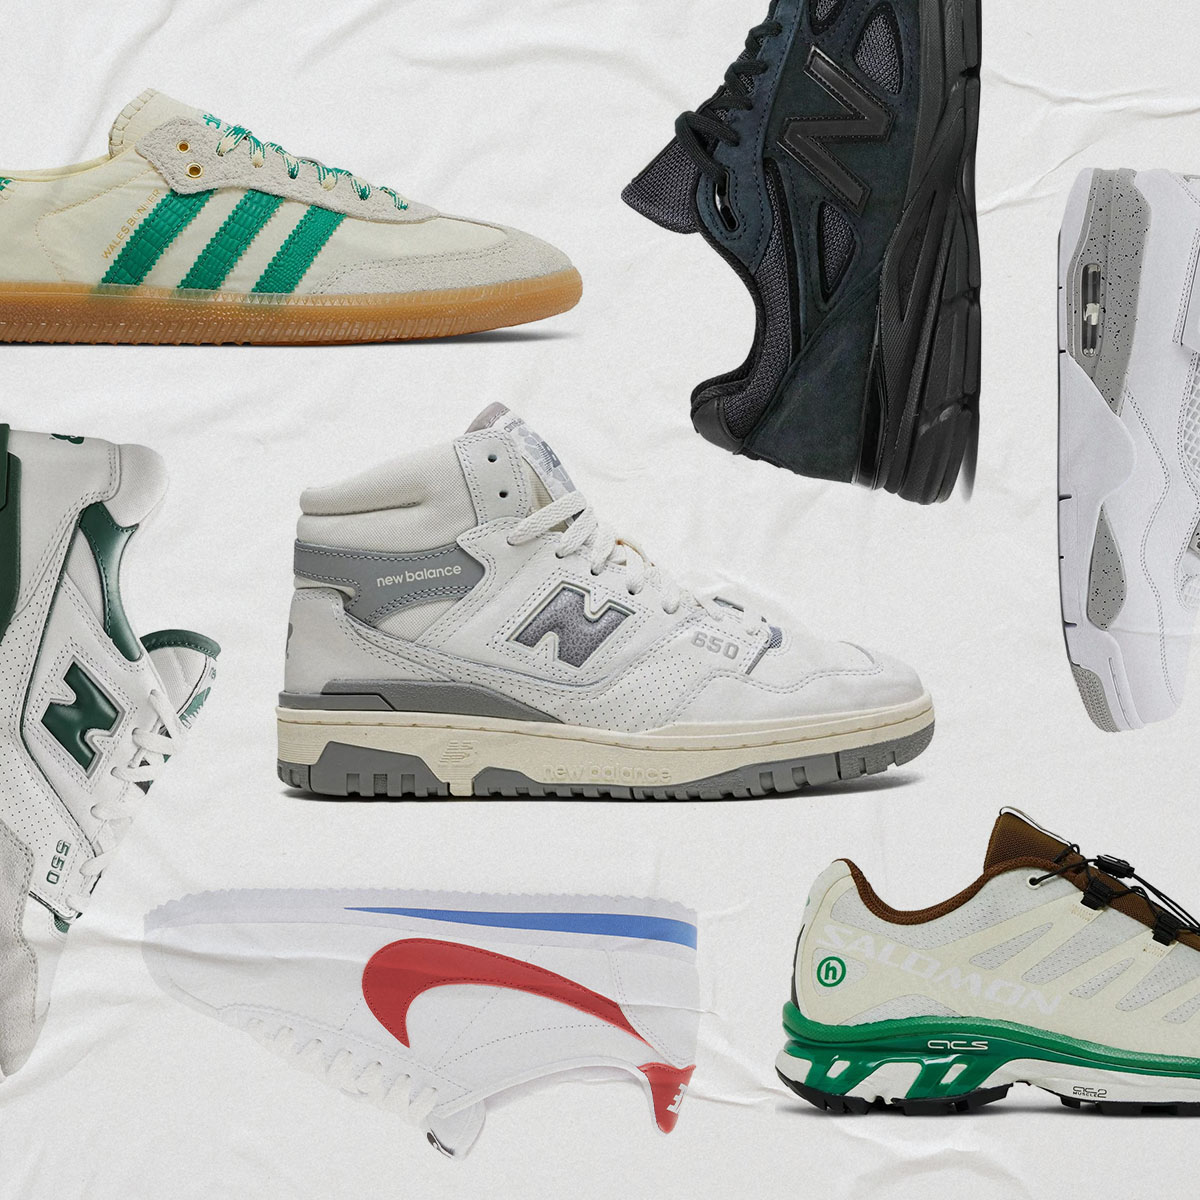 16 Ways to Style Sneakers in 2019 - Farfetch